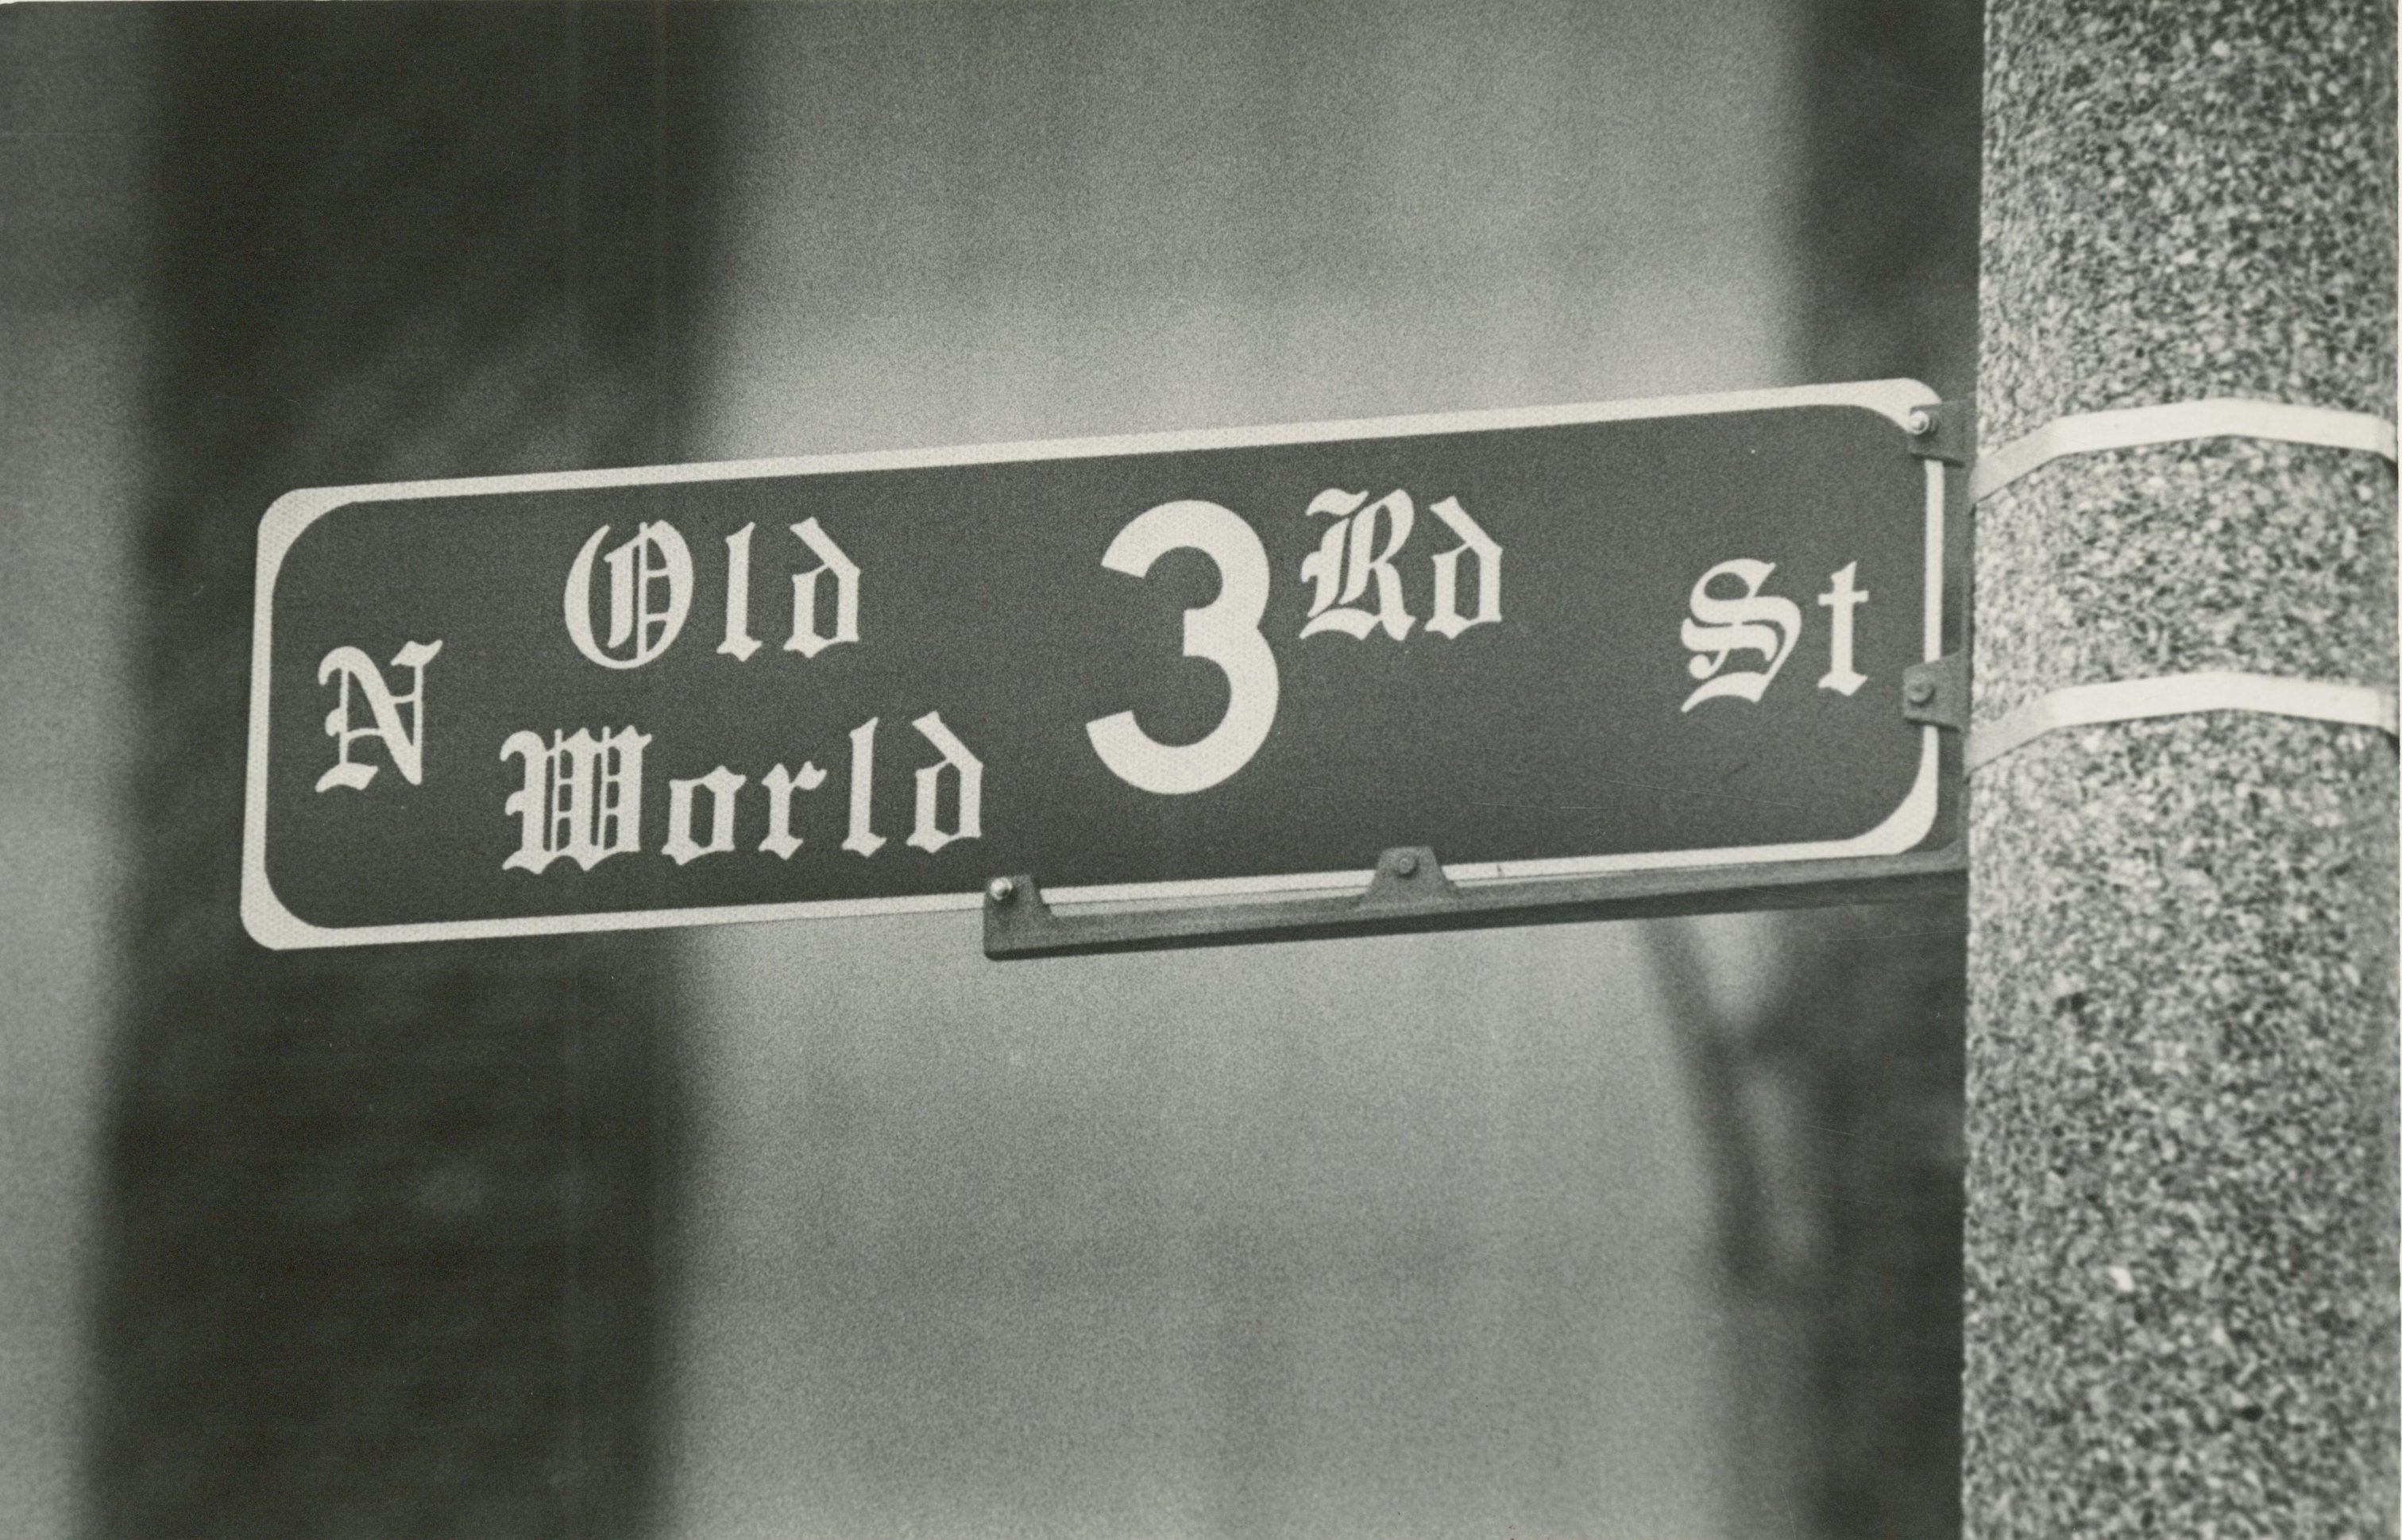 In 1984, the City of Milwaukee renamed different sections of 3rd Street as Old World Third Street and Martin Luther King Drive, reversing a simplification of street name rationalization initiated earlier in the 20th century.